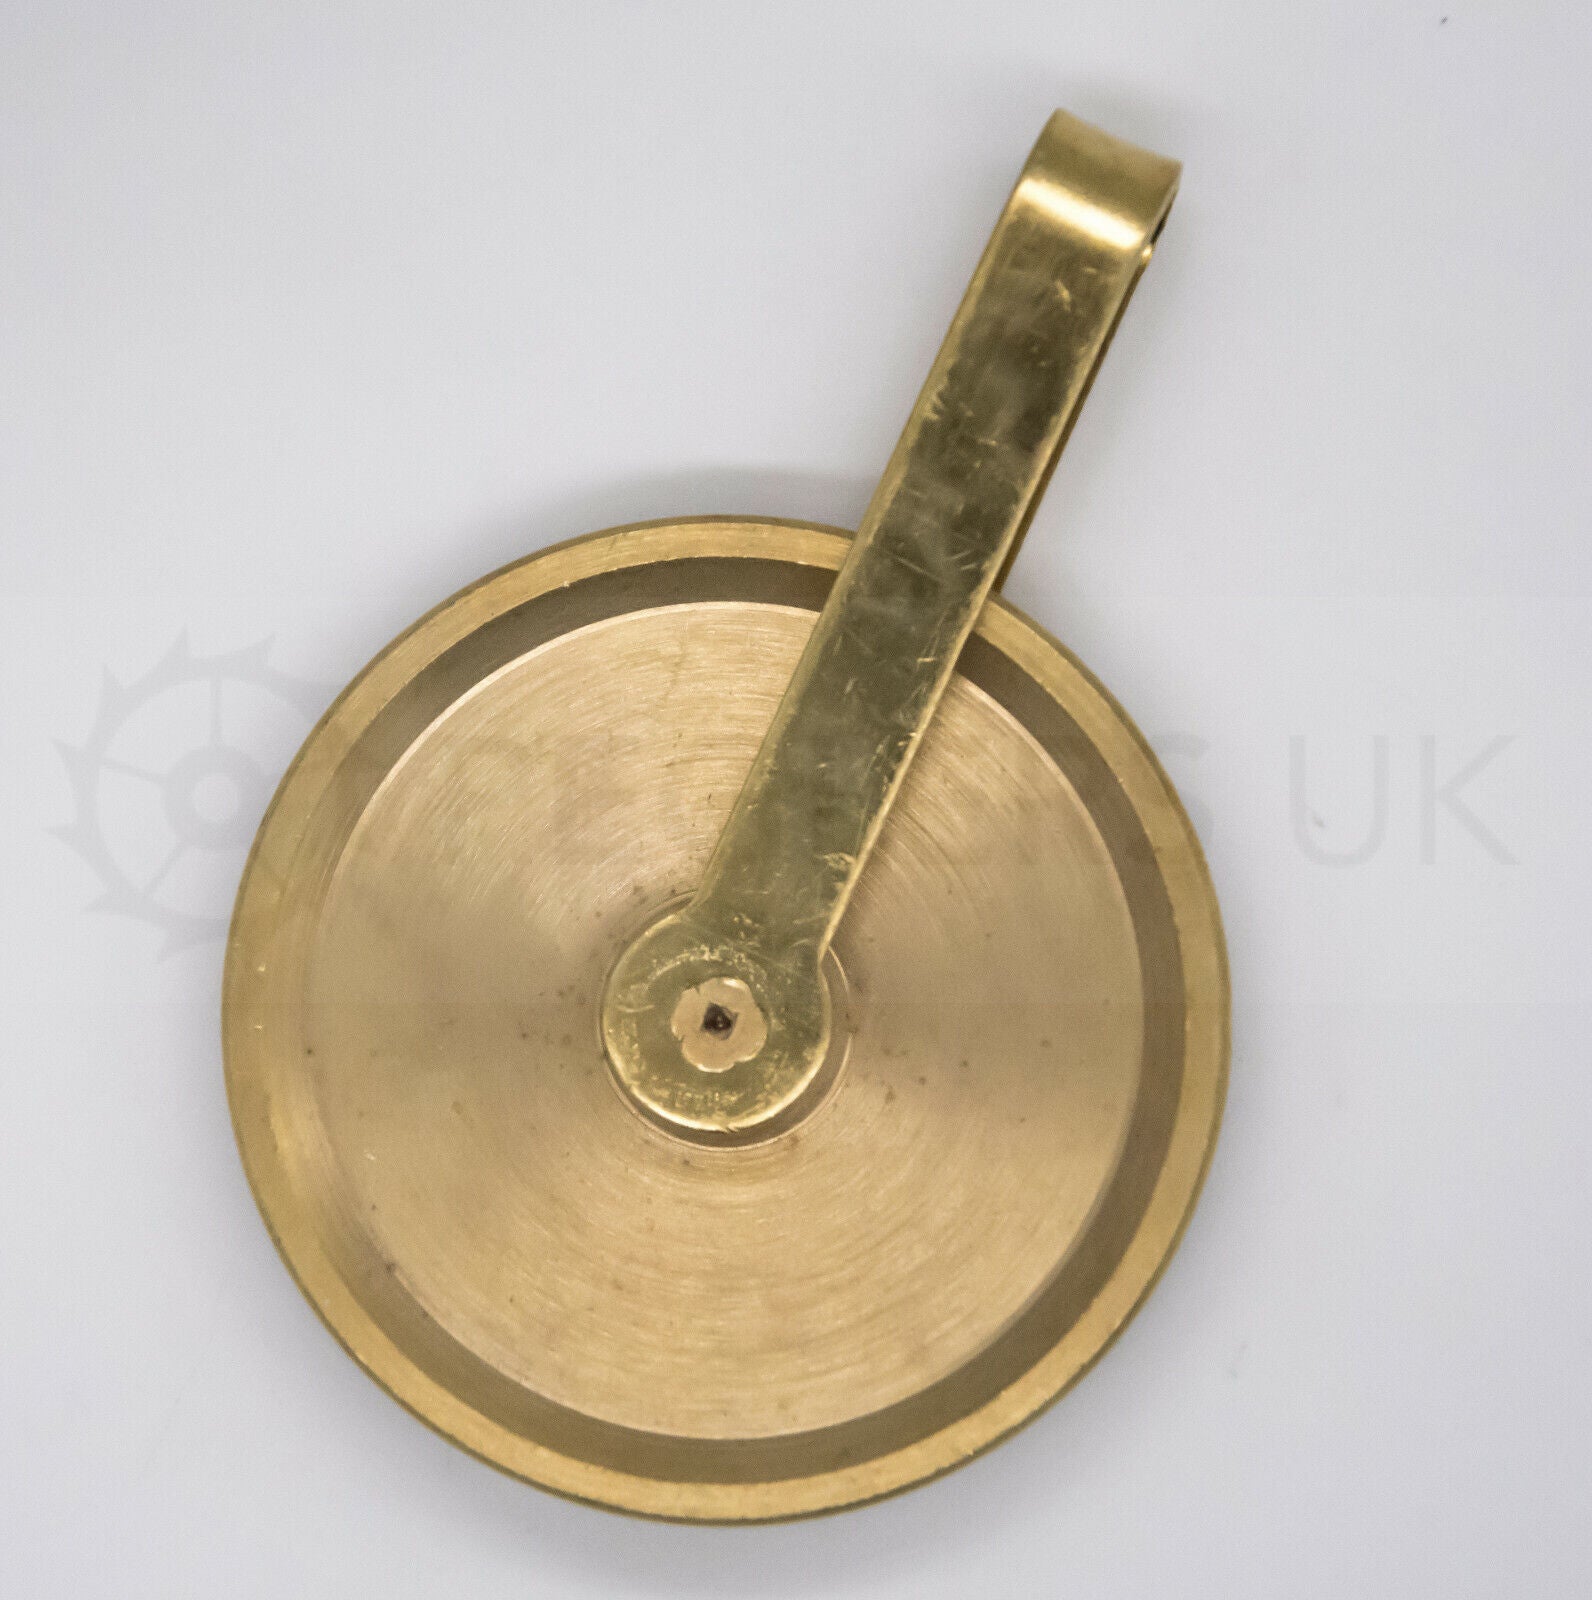 Gut/Cable Pulley for Longcase Clocks - 44mm (1 3/4 inch)